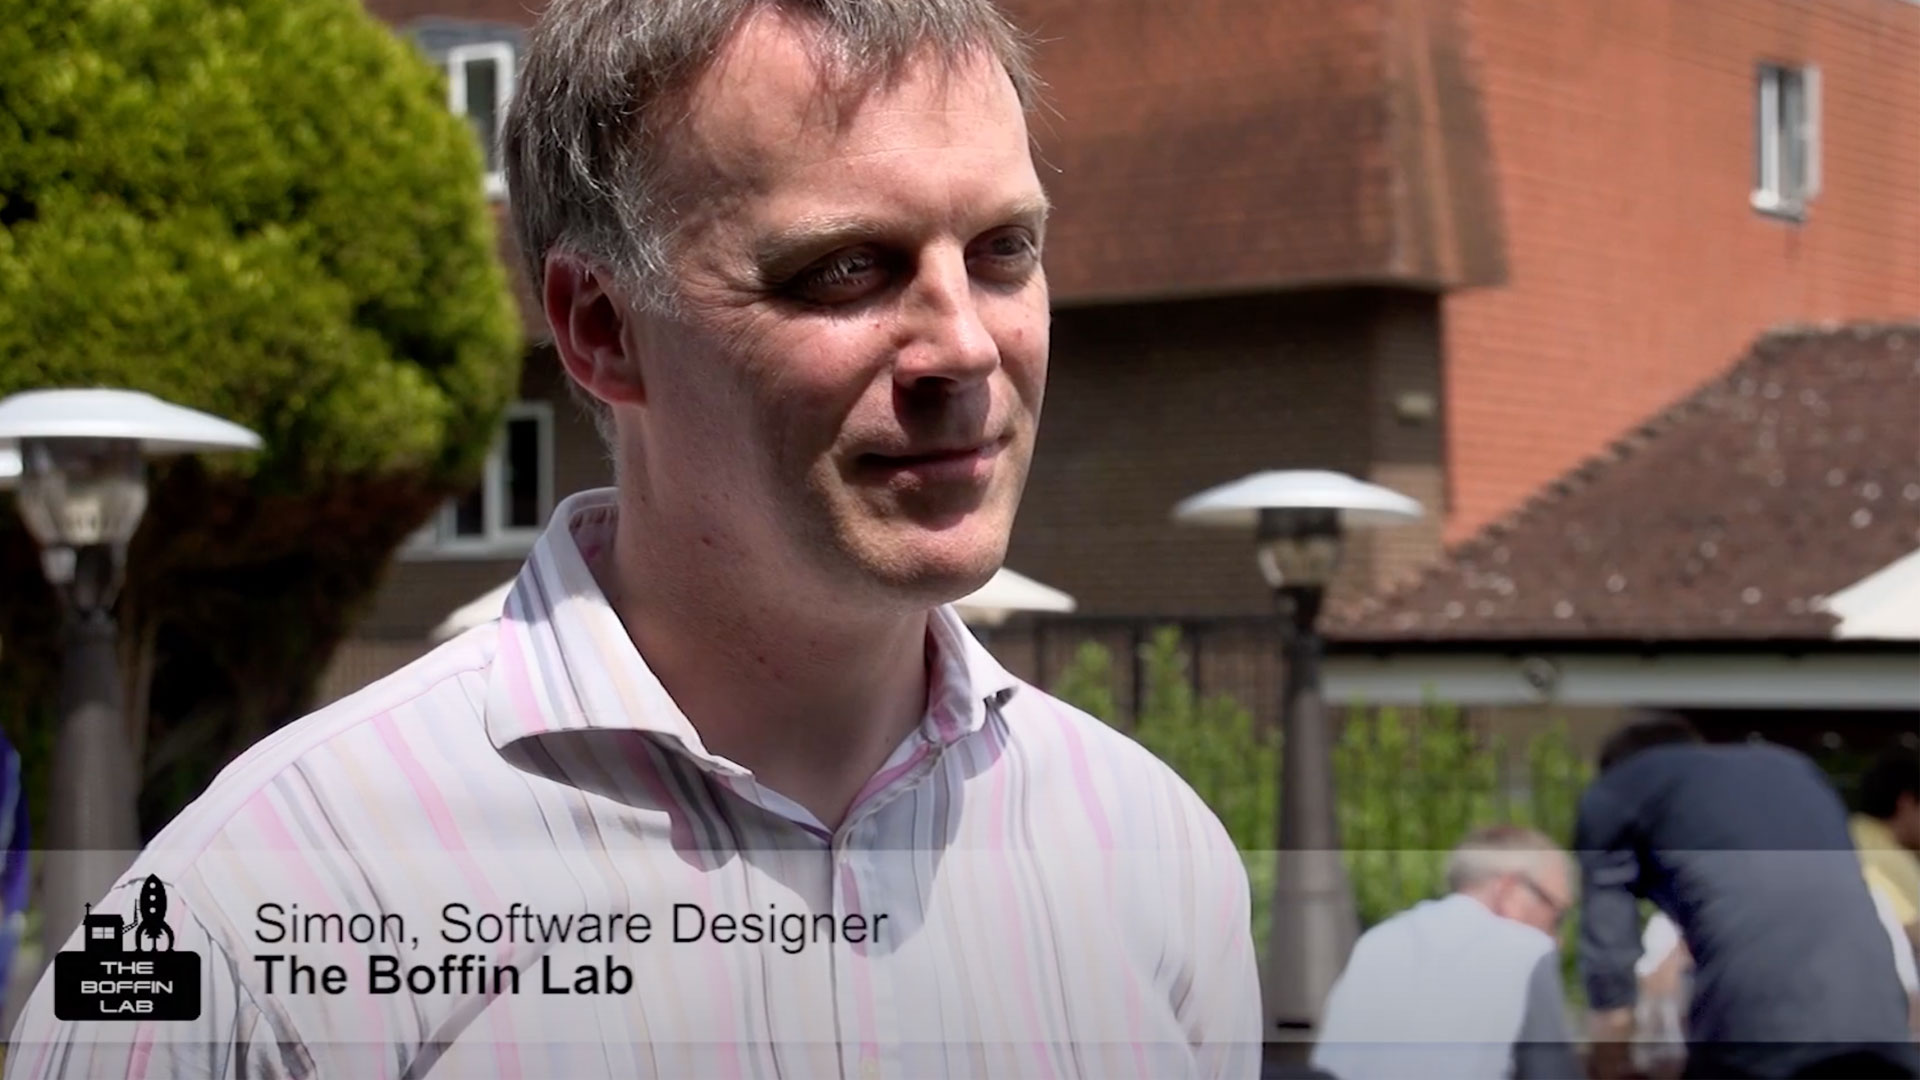 Testimonials for Accountants in Hertfordshire The Boffin Lab